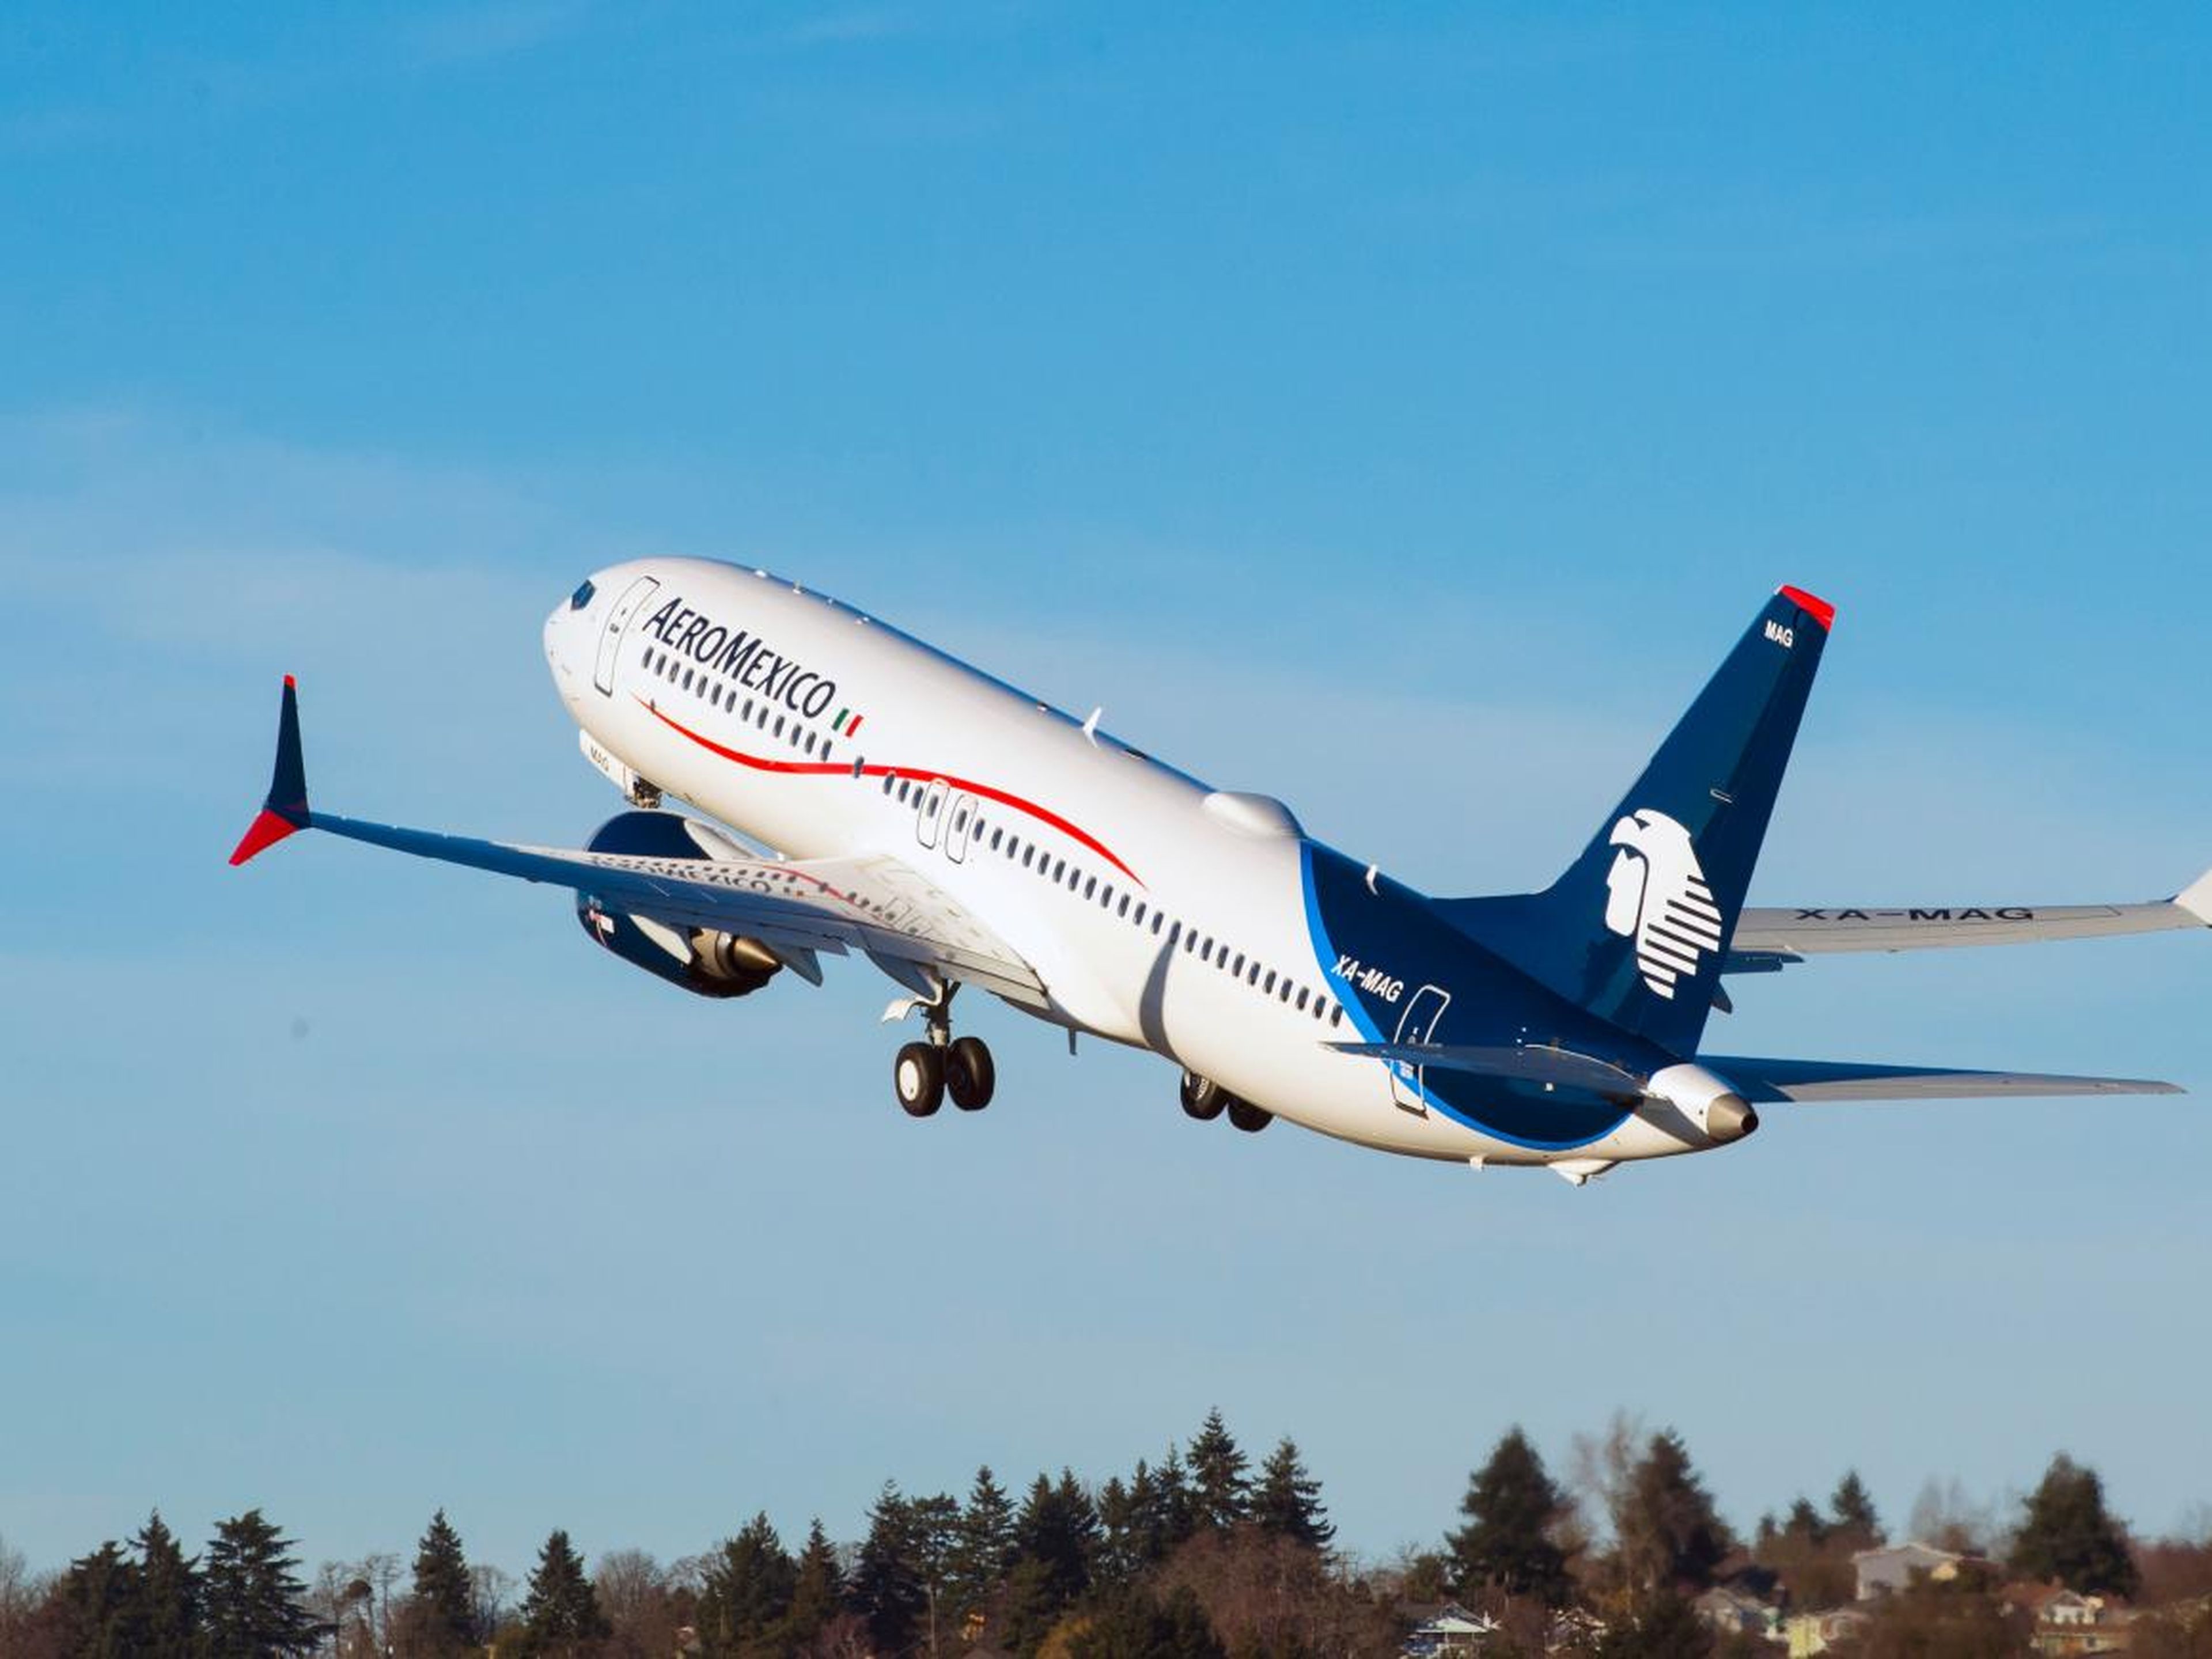 A 737 Max aircraft operated by Aeromexico.